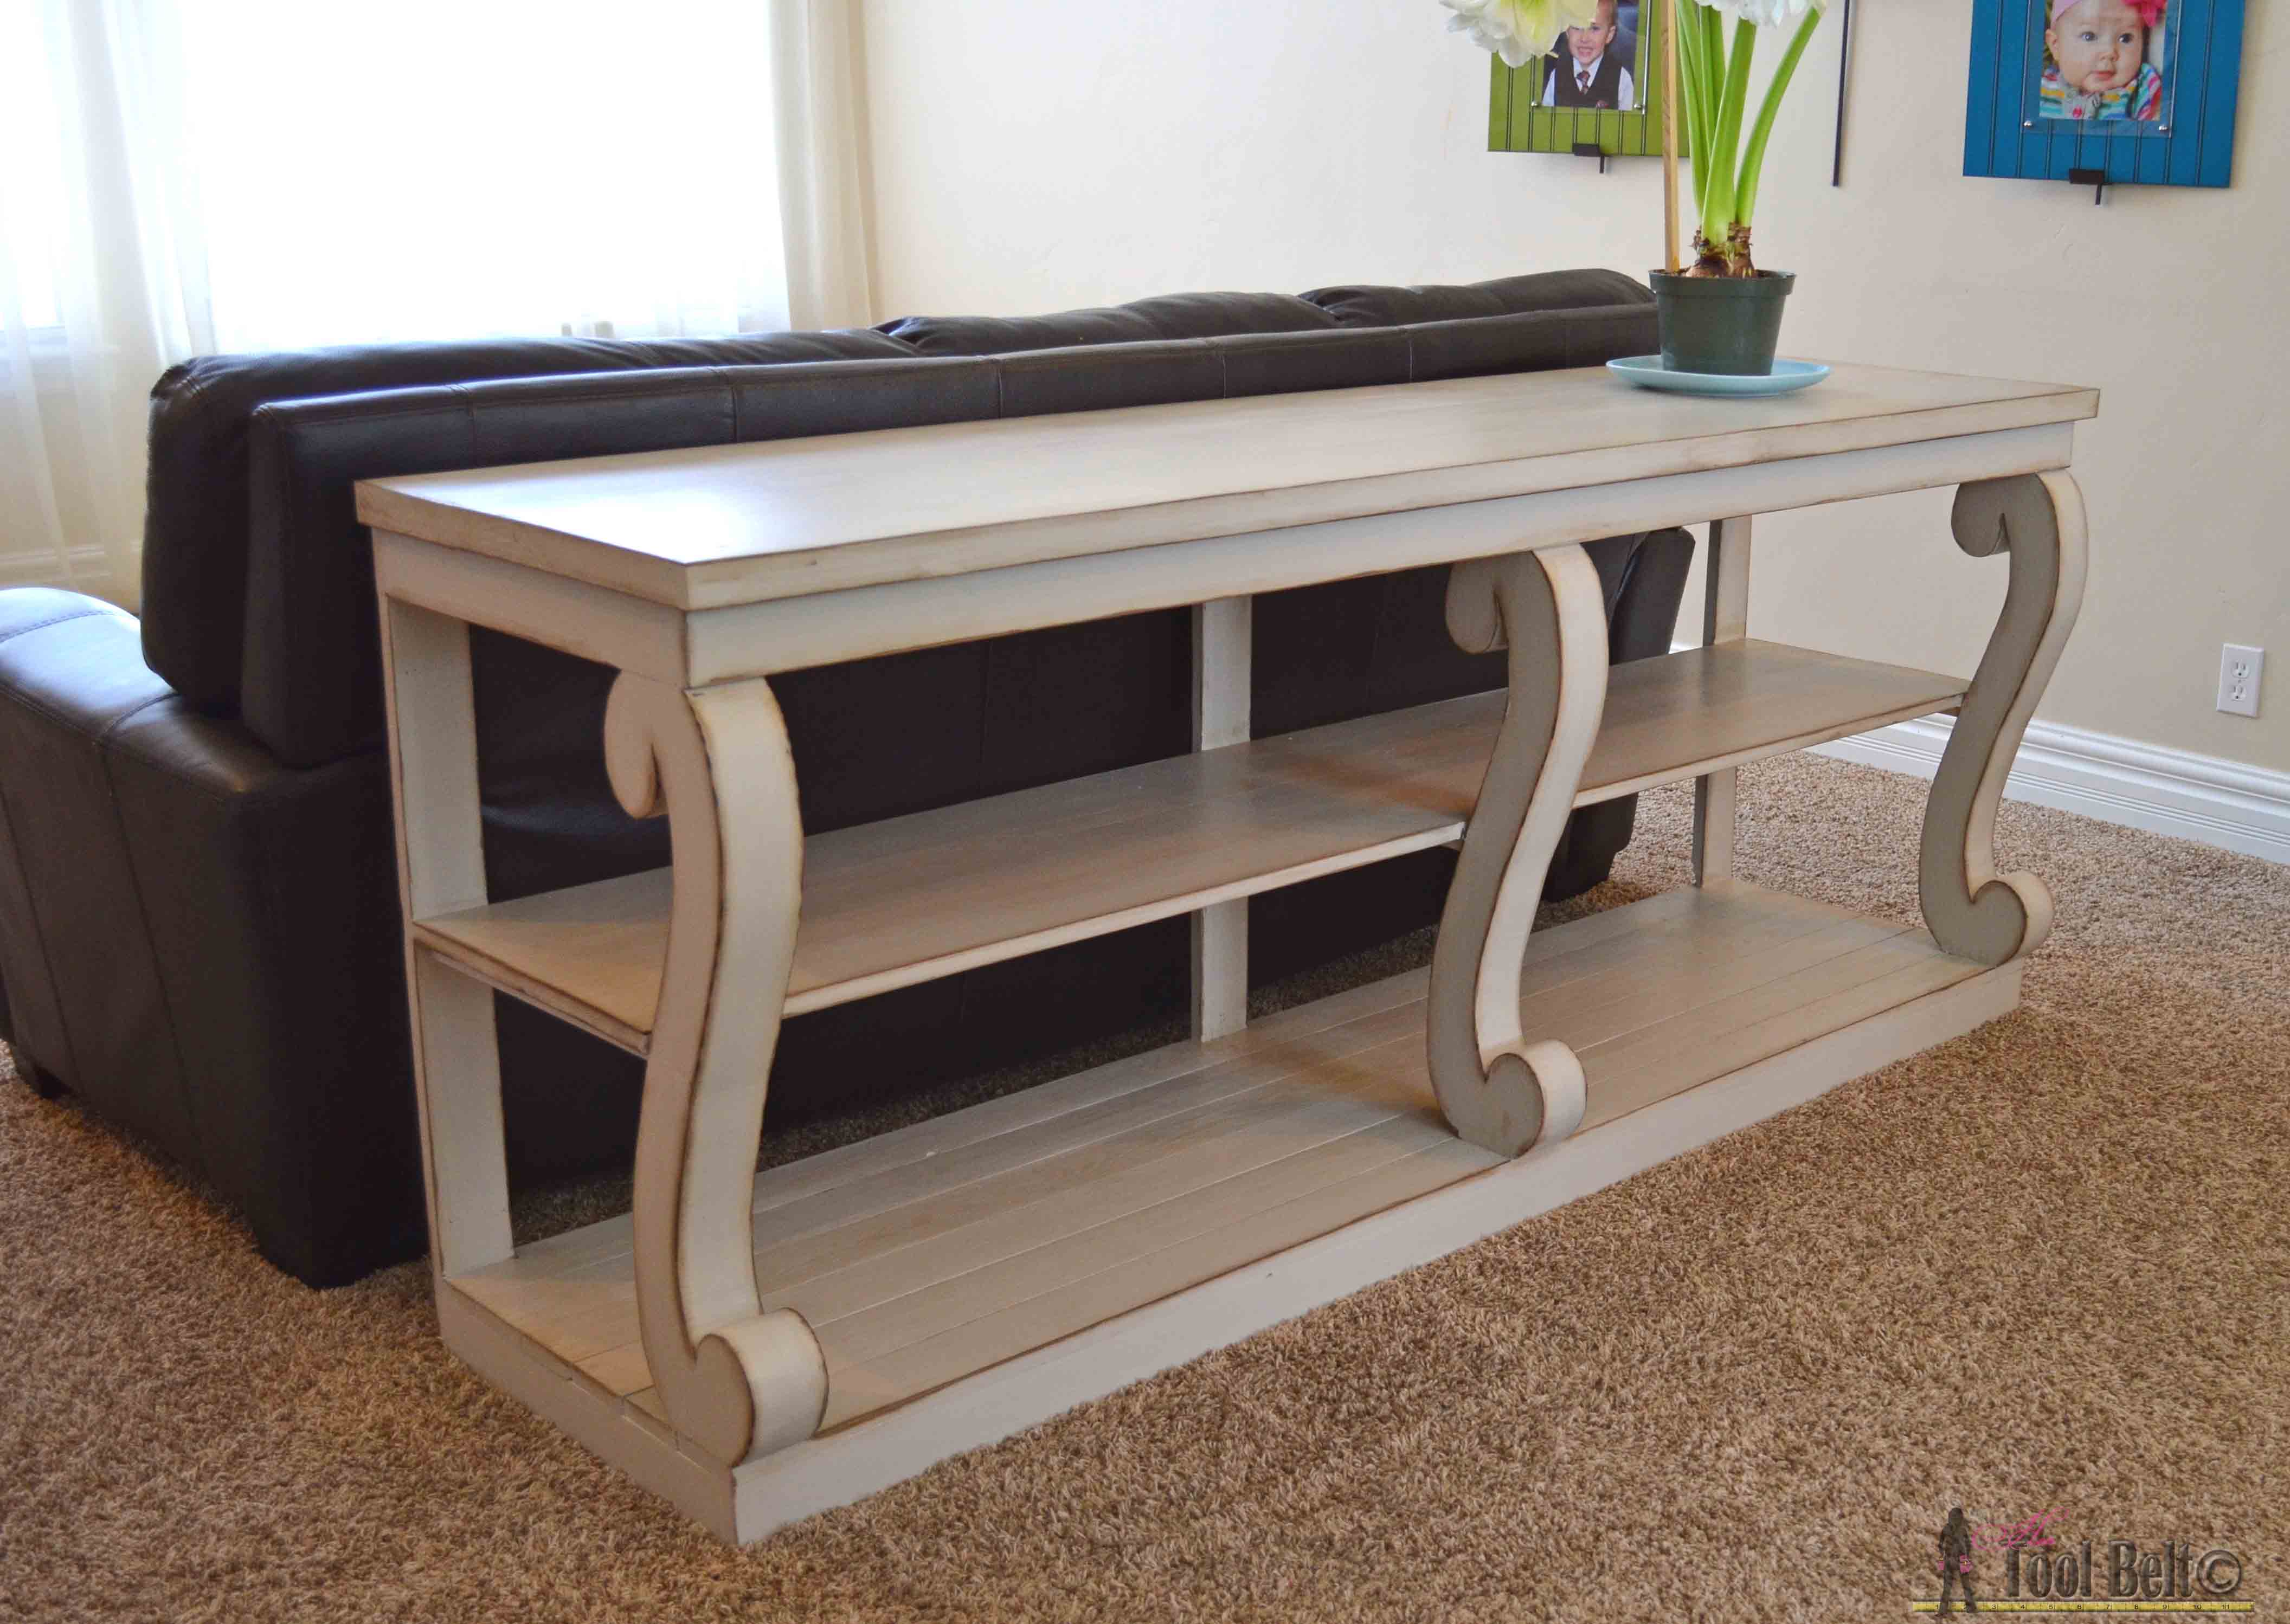 Console Table with Scroll Legs - Her Tool Belt